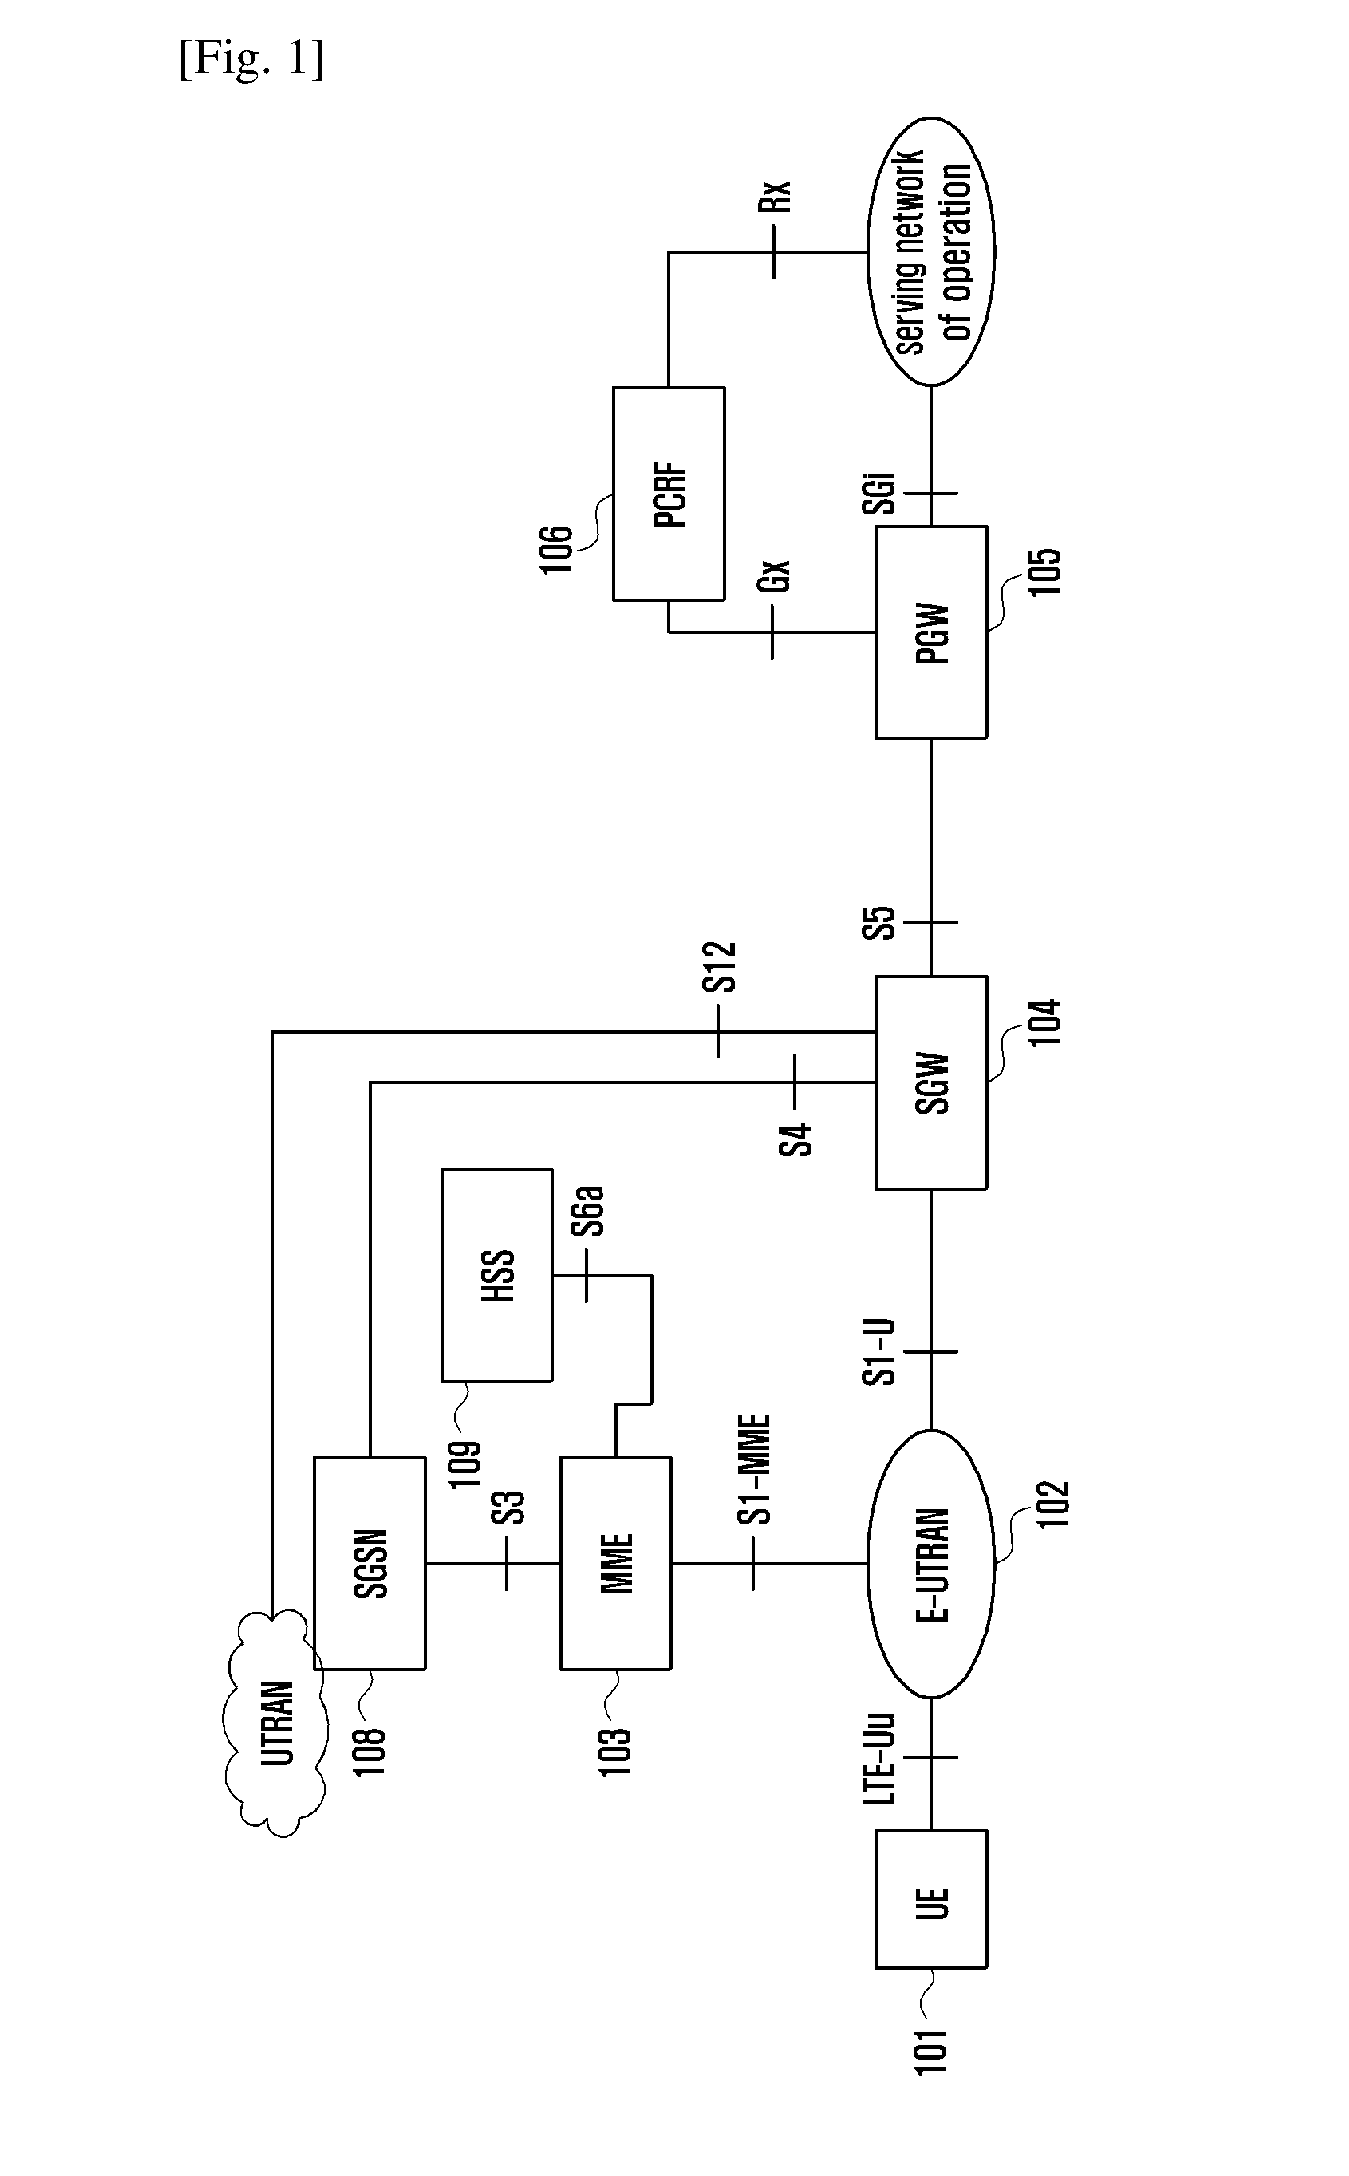 Method and device for setting up local breakout bearers